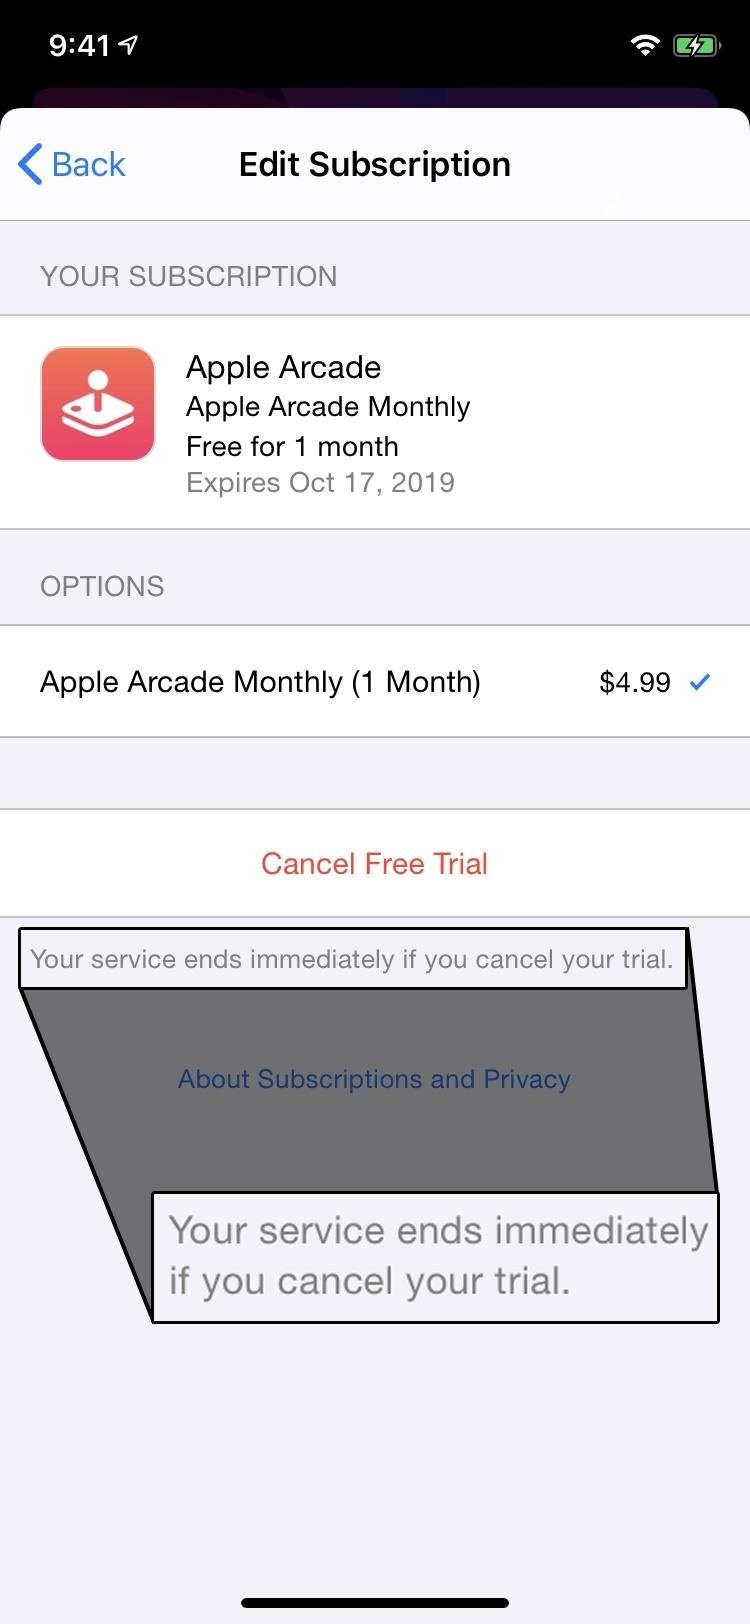 PSA: Don't Cancel Your Apple Arcade Free Trial Until the Last Possible Second